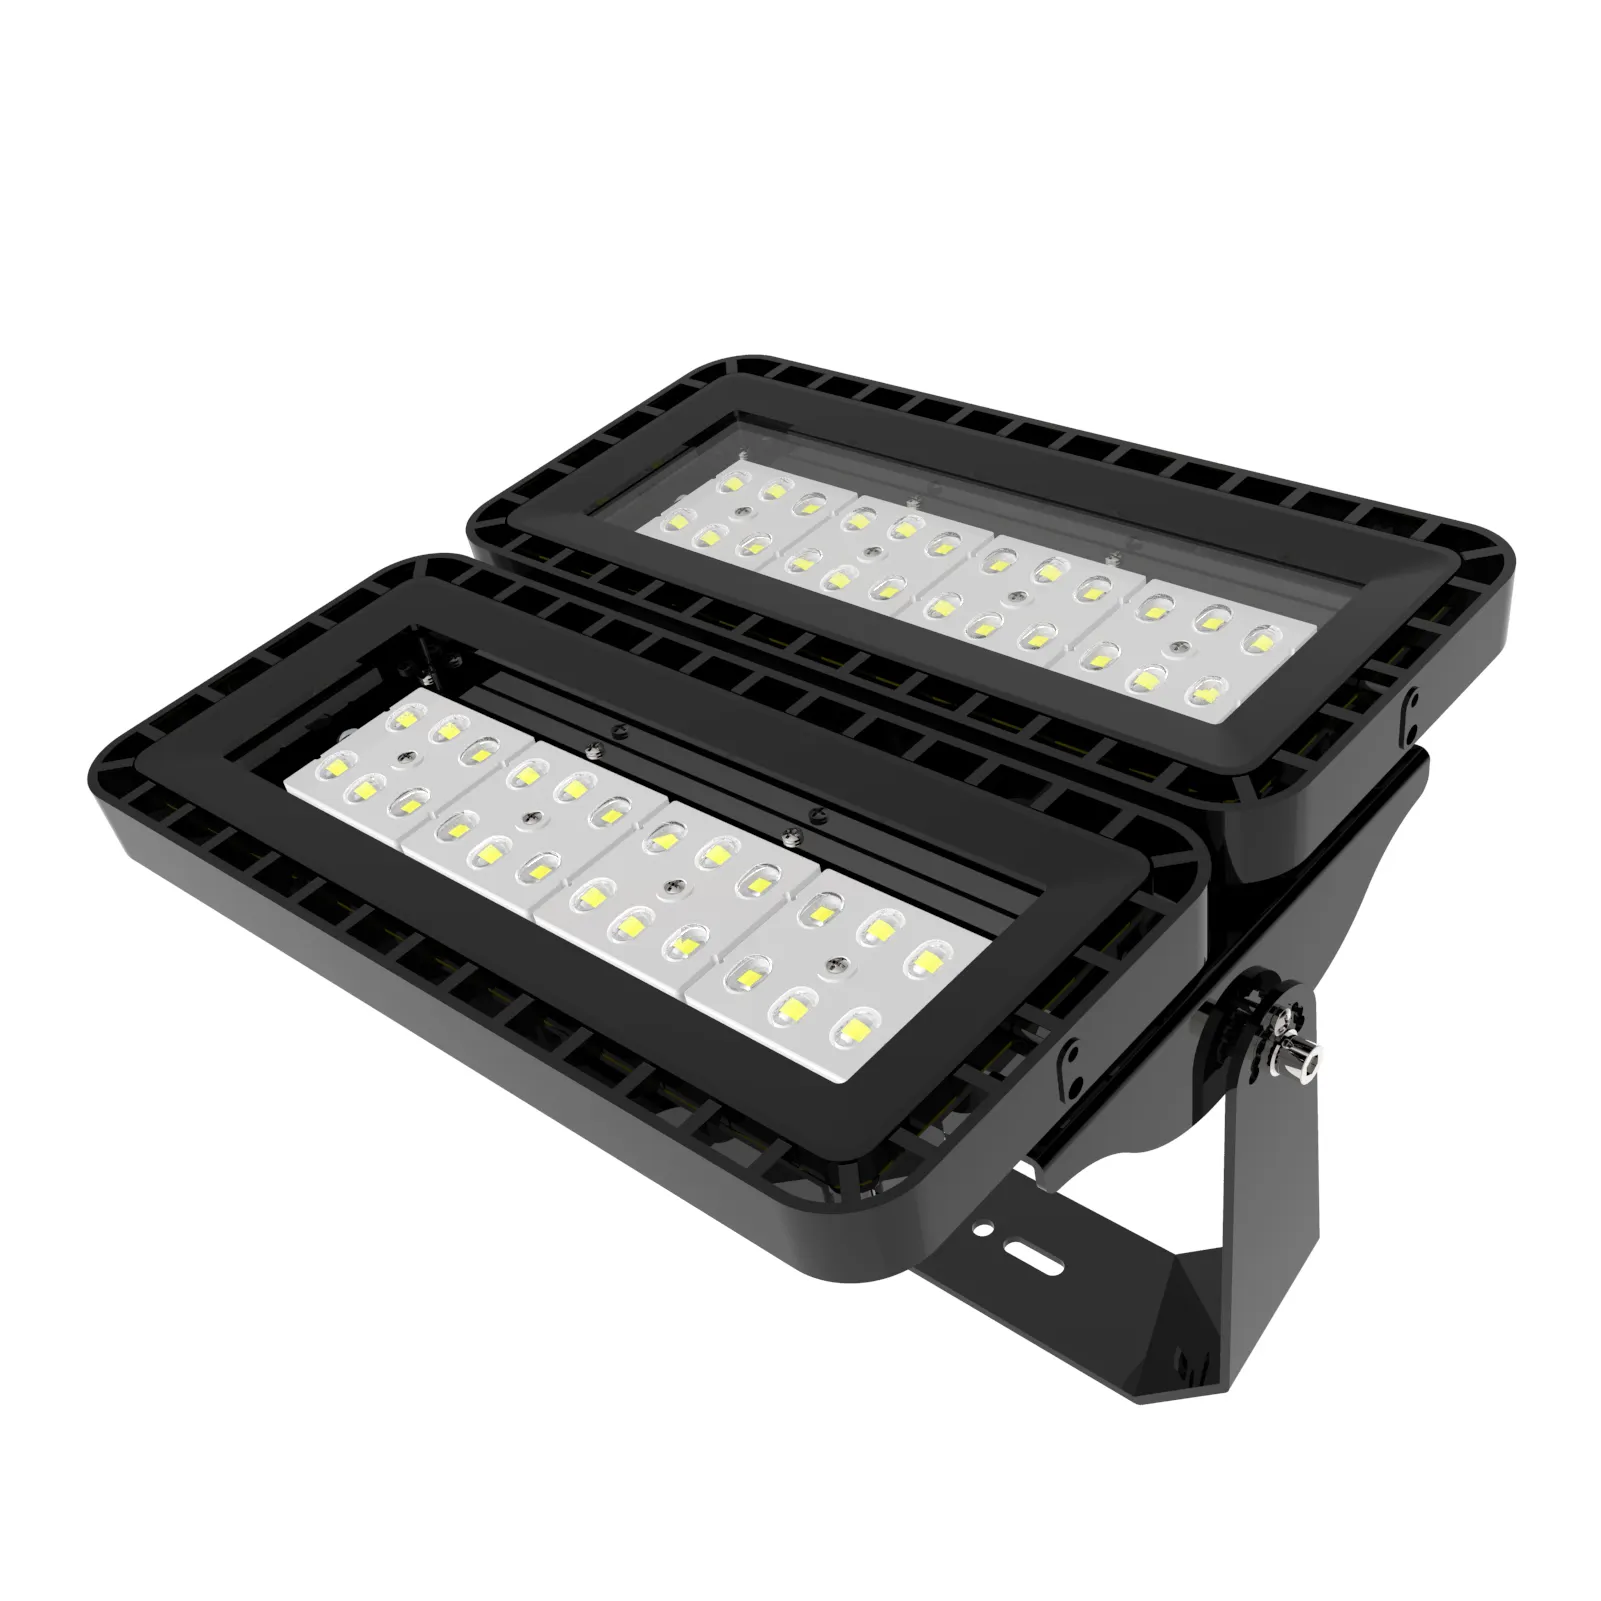 Dongguan Rongjia best price high efficient led floodlight 100w LED Flood lights 200w 300w for area stadium lighting